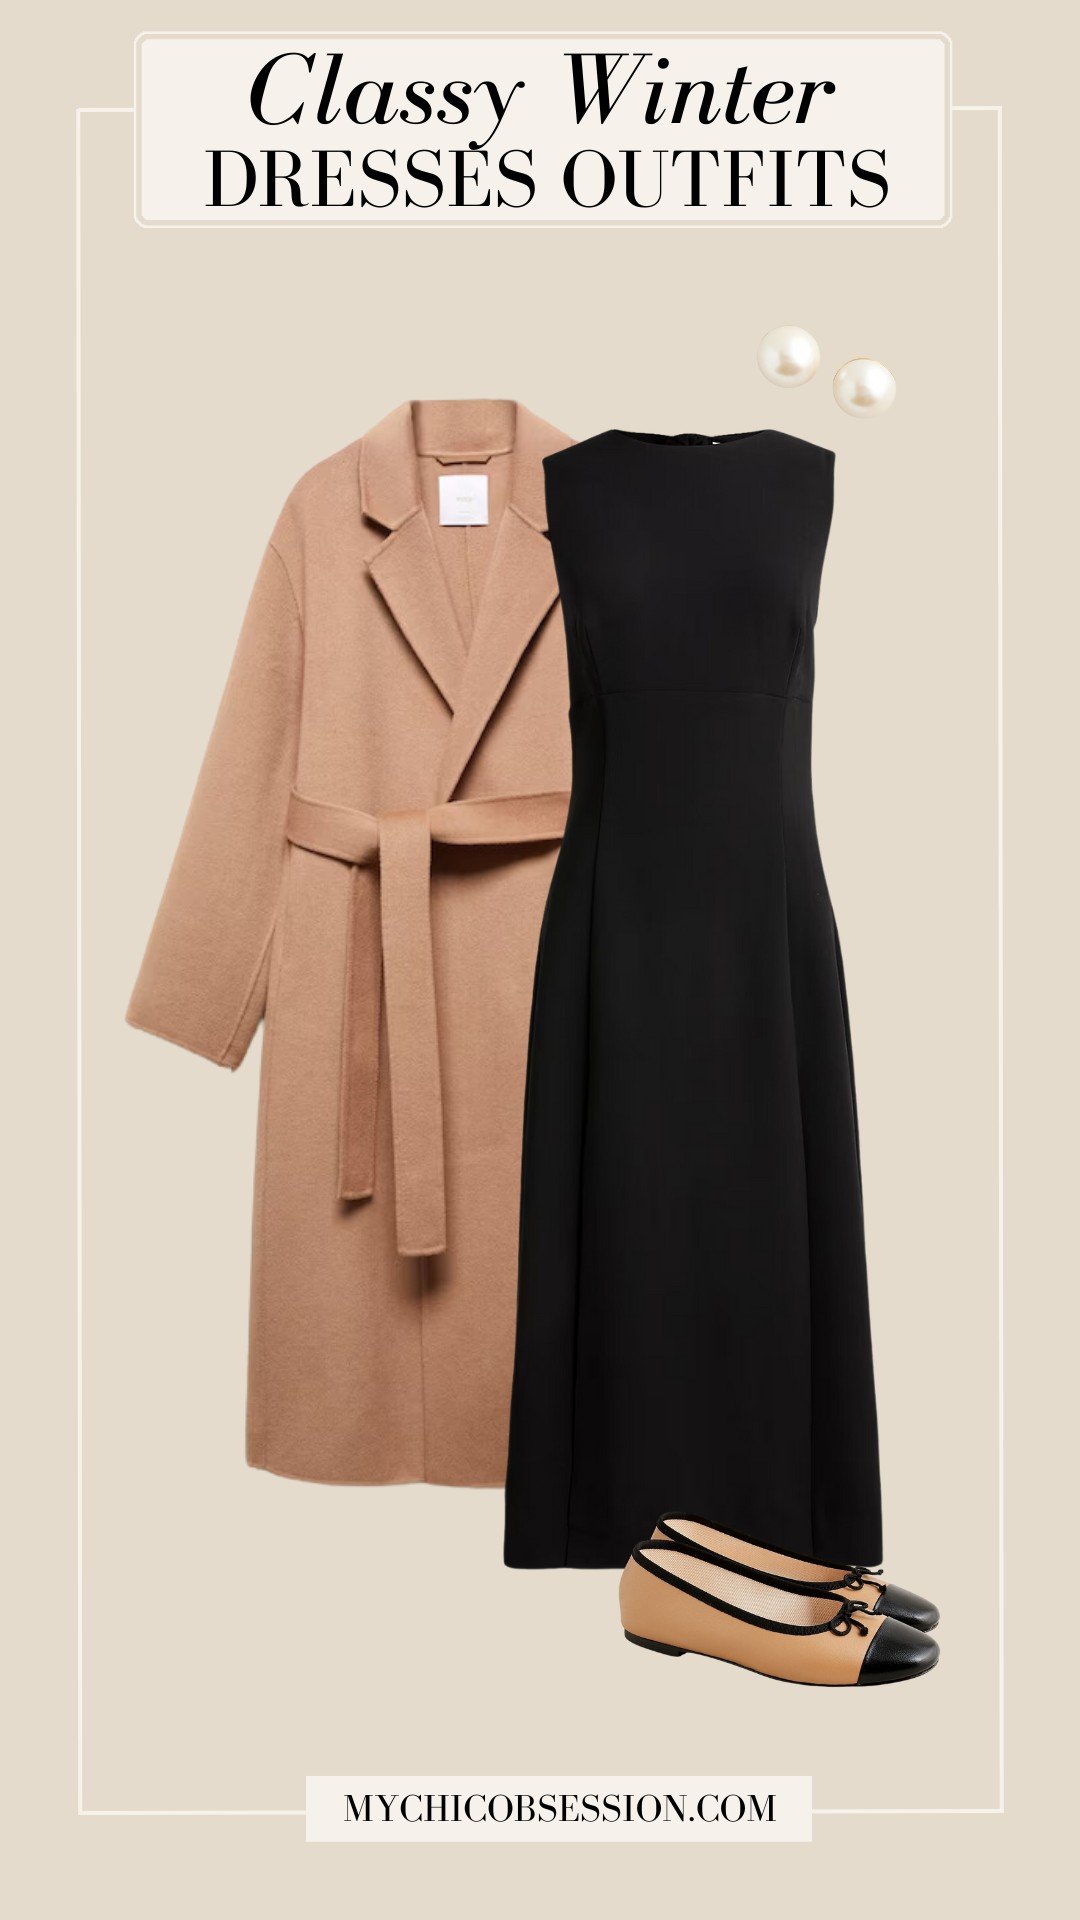 classy winter dresses outfits